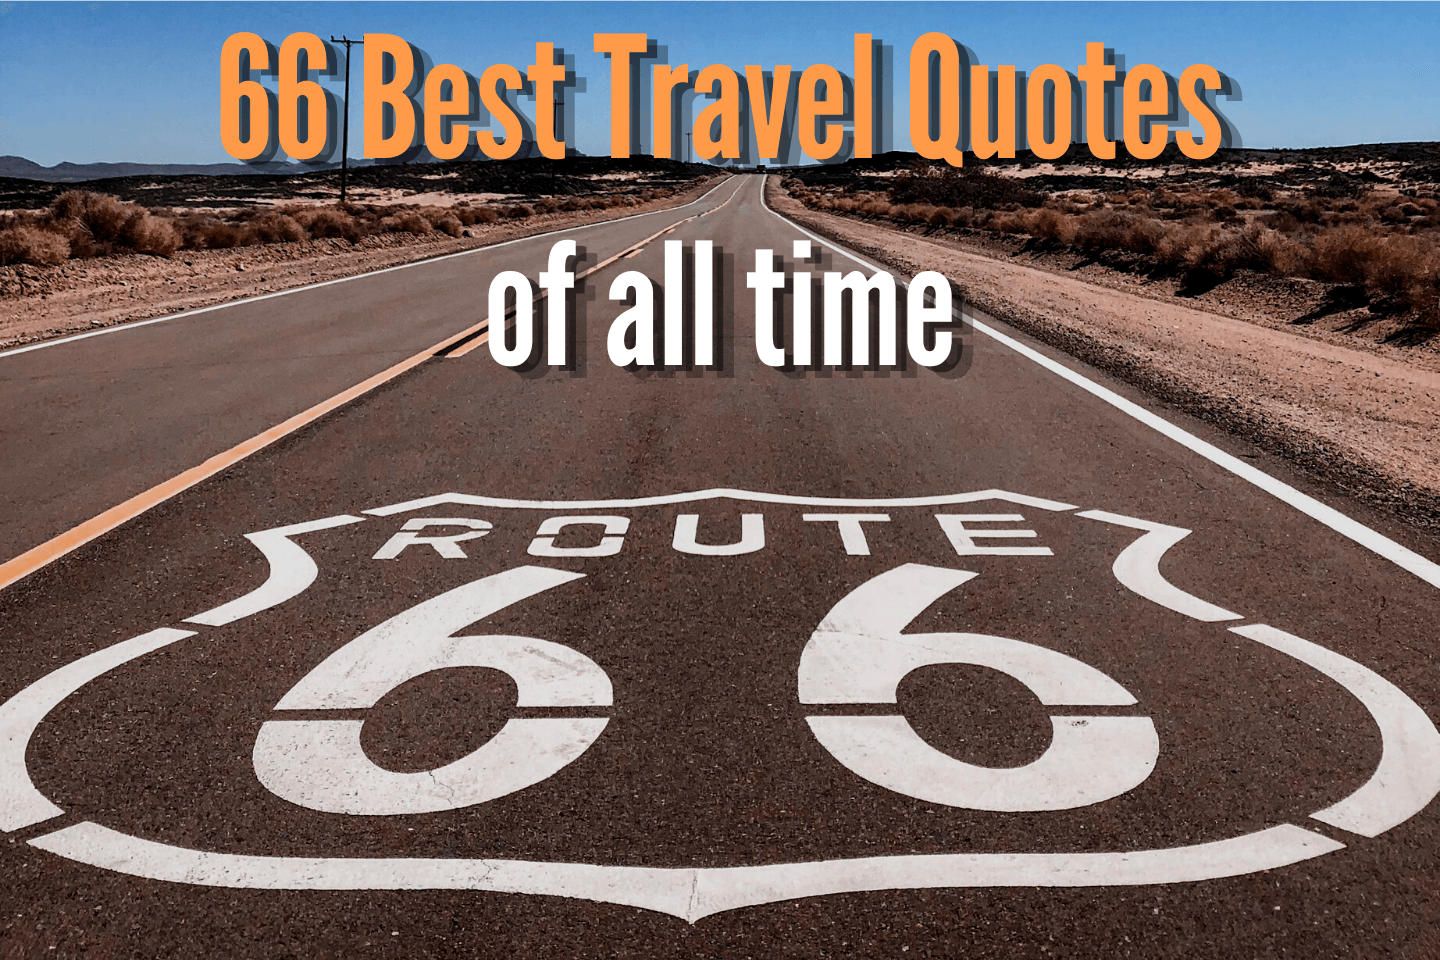 Best Travel Quotes of all time